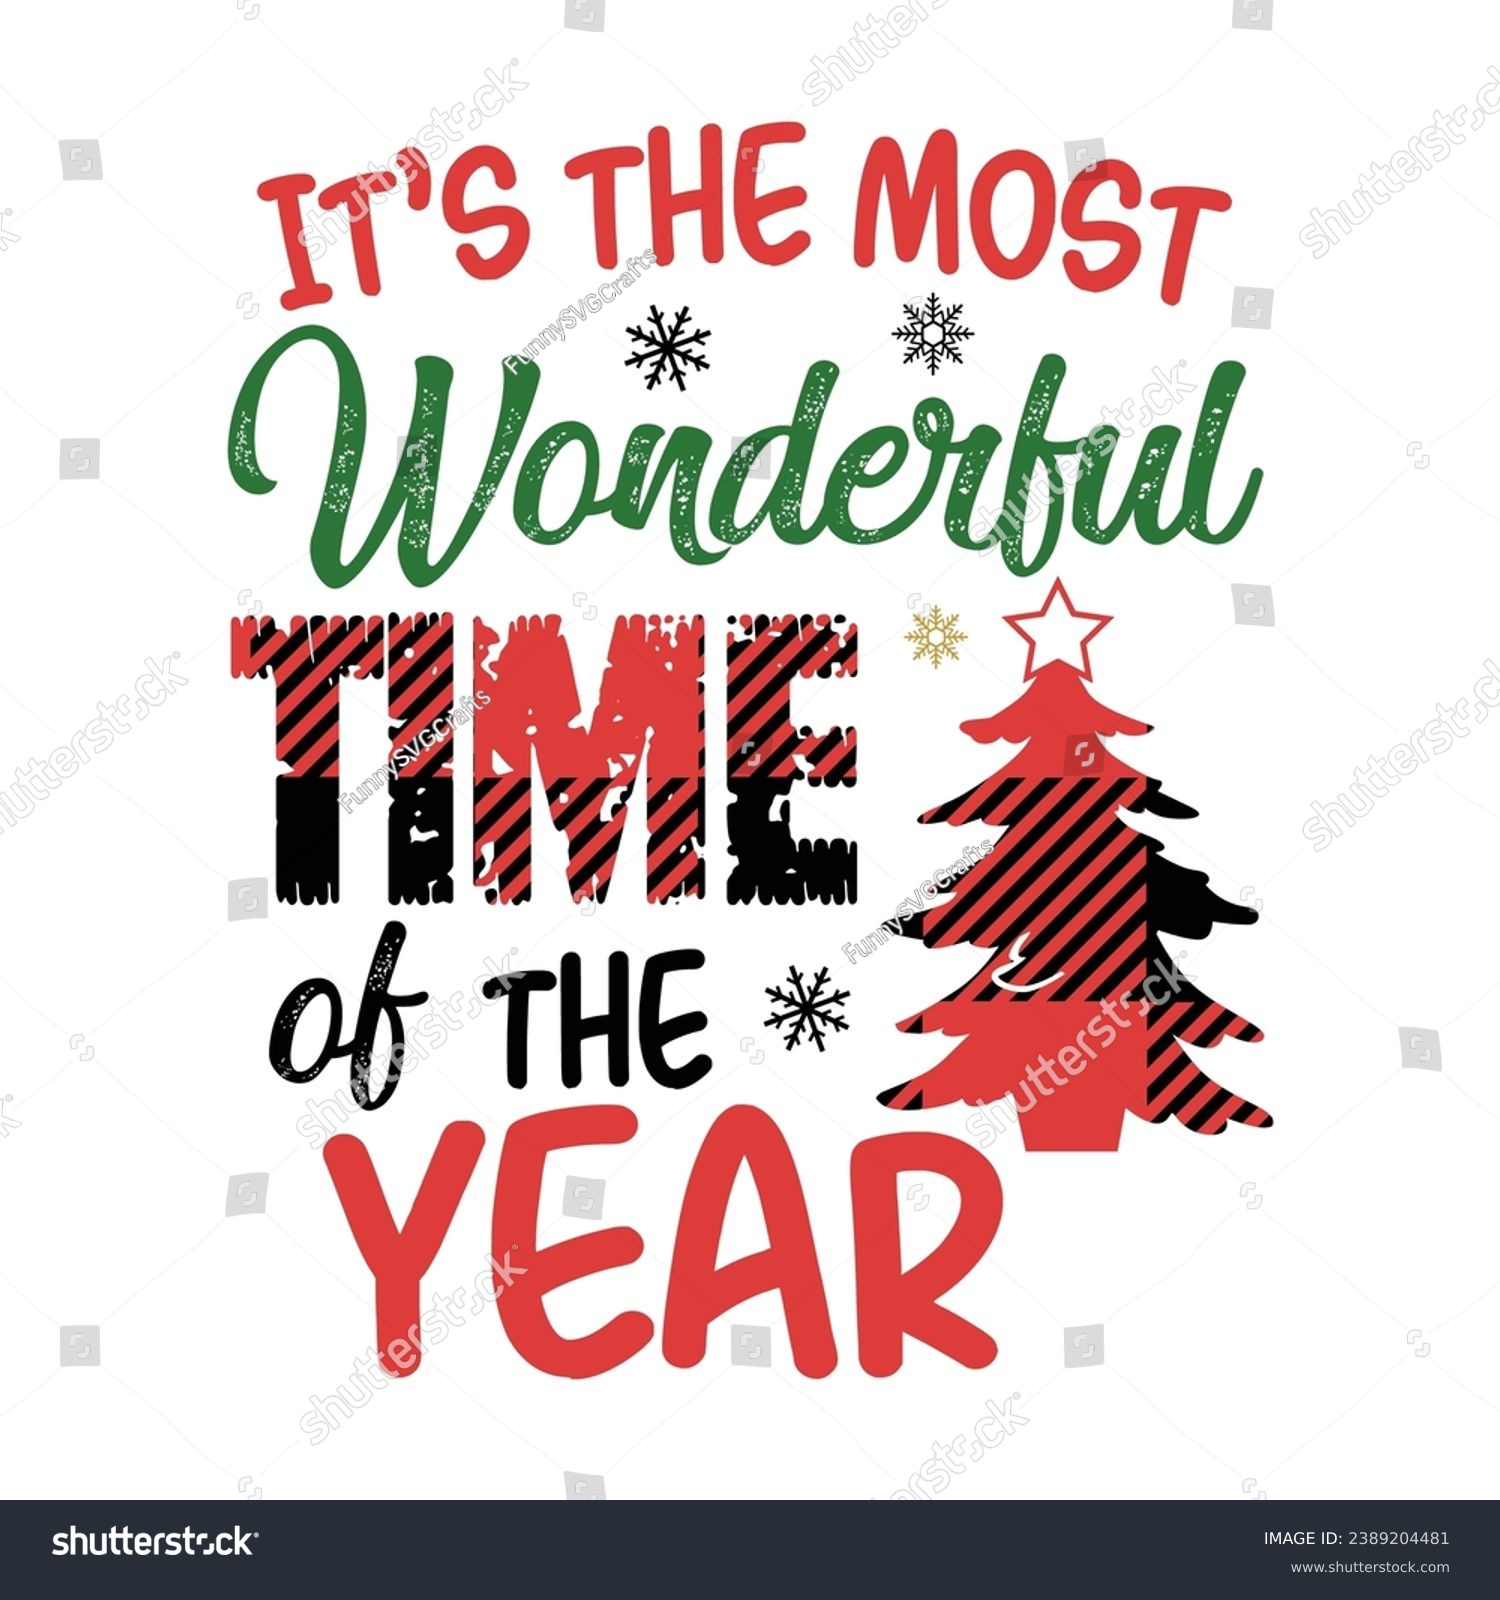 SVG of It's the Most Wonderful Time of the Year Shirt, Christmas Tree, Christmas Buffalo plaid Shirt, Christmas Holidays Shirt, Funny Christmas svg